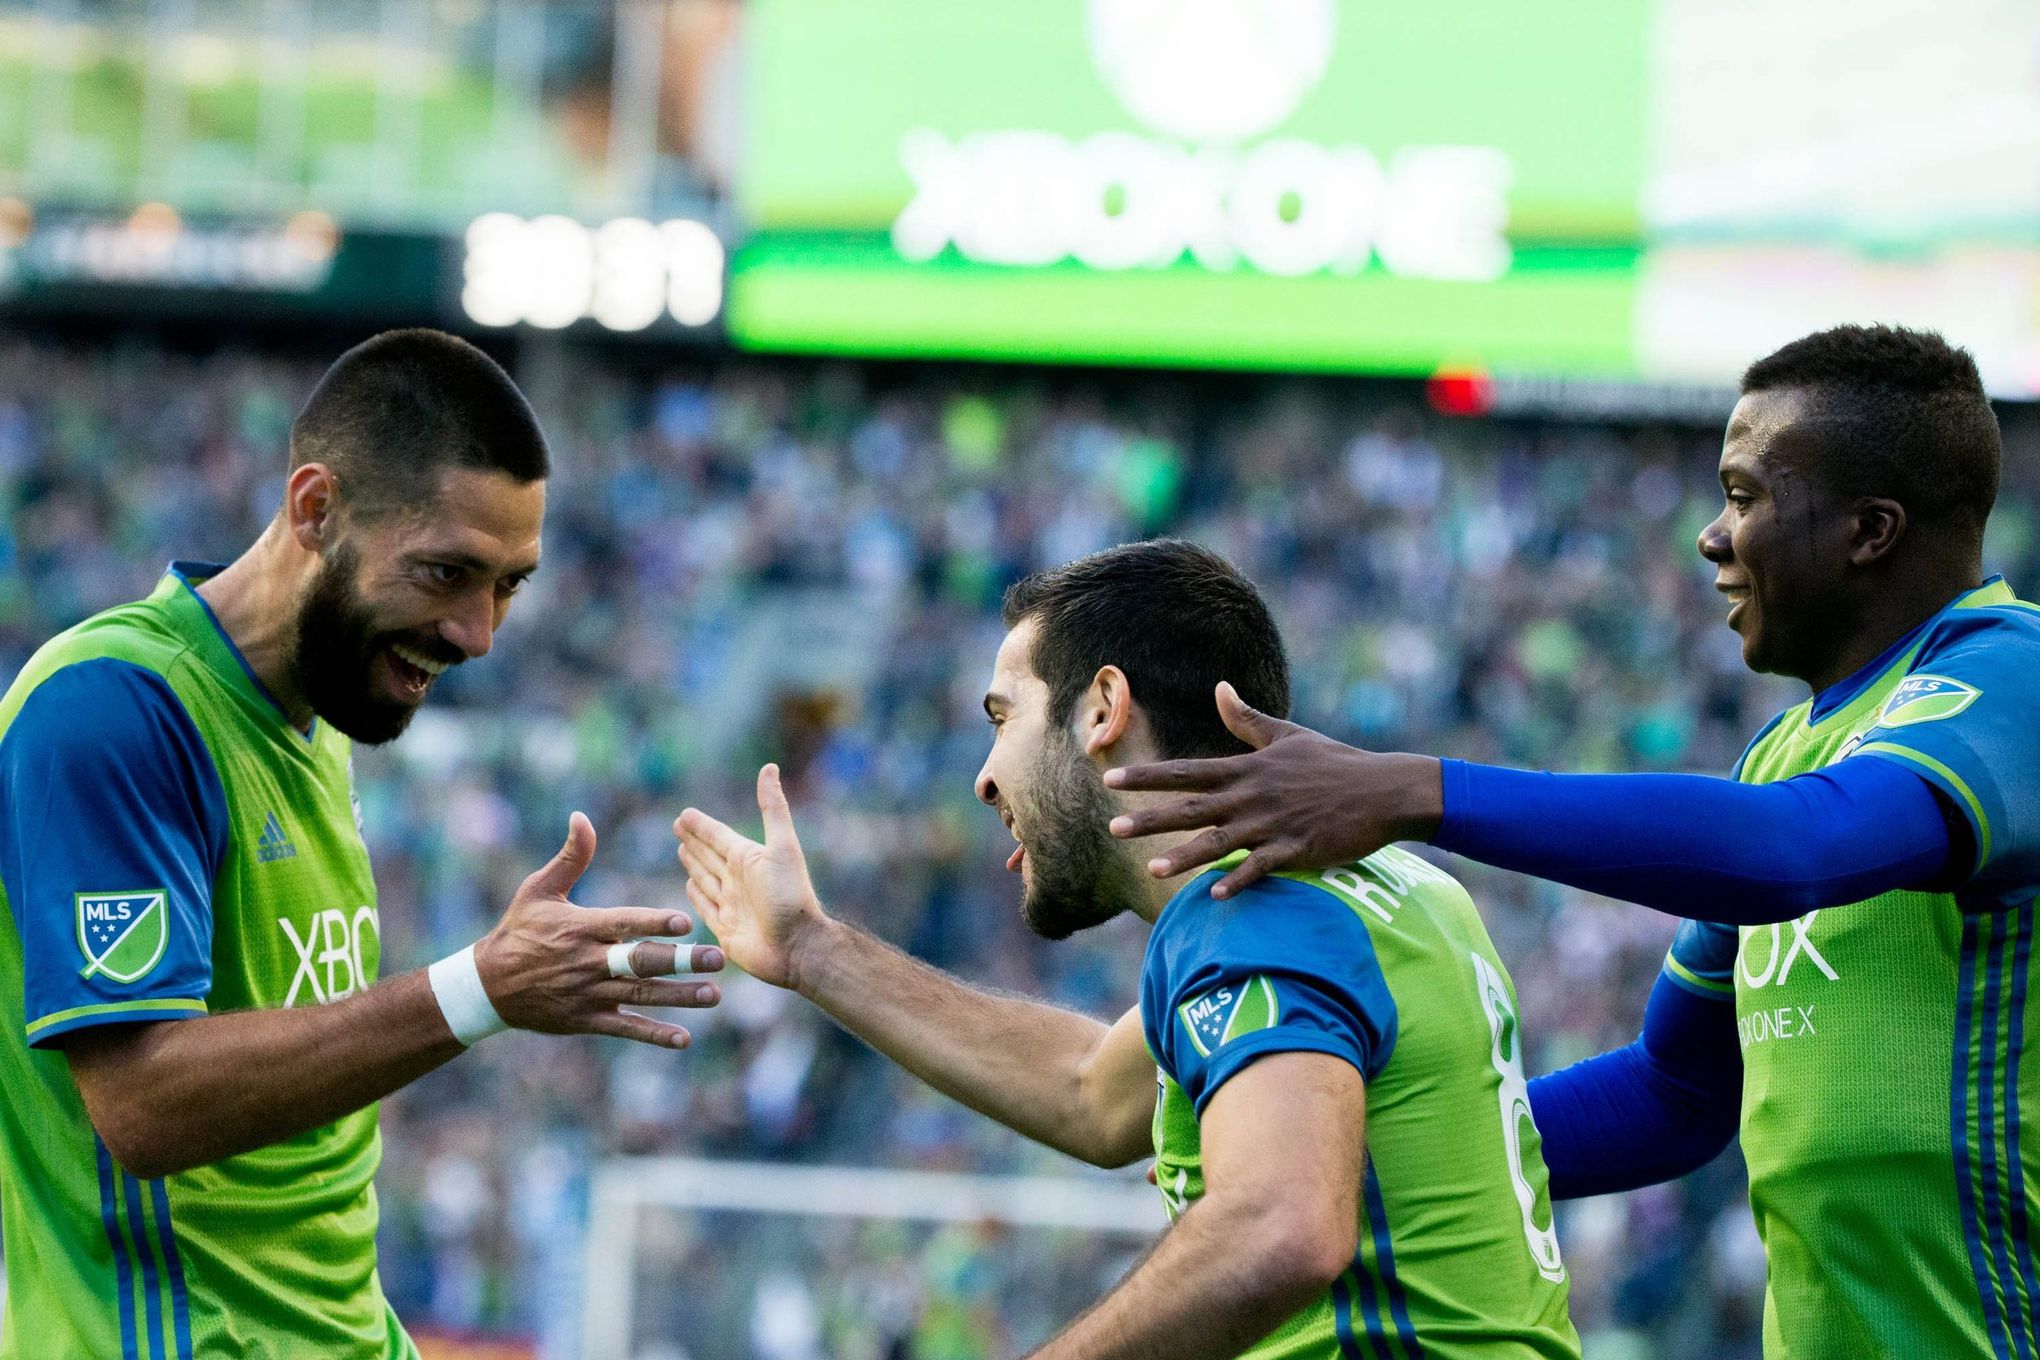 Sounders' Clint Dempsey wins MLS Comeback Player